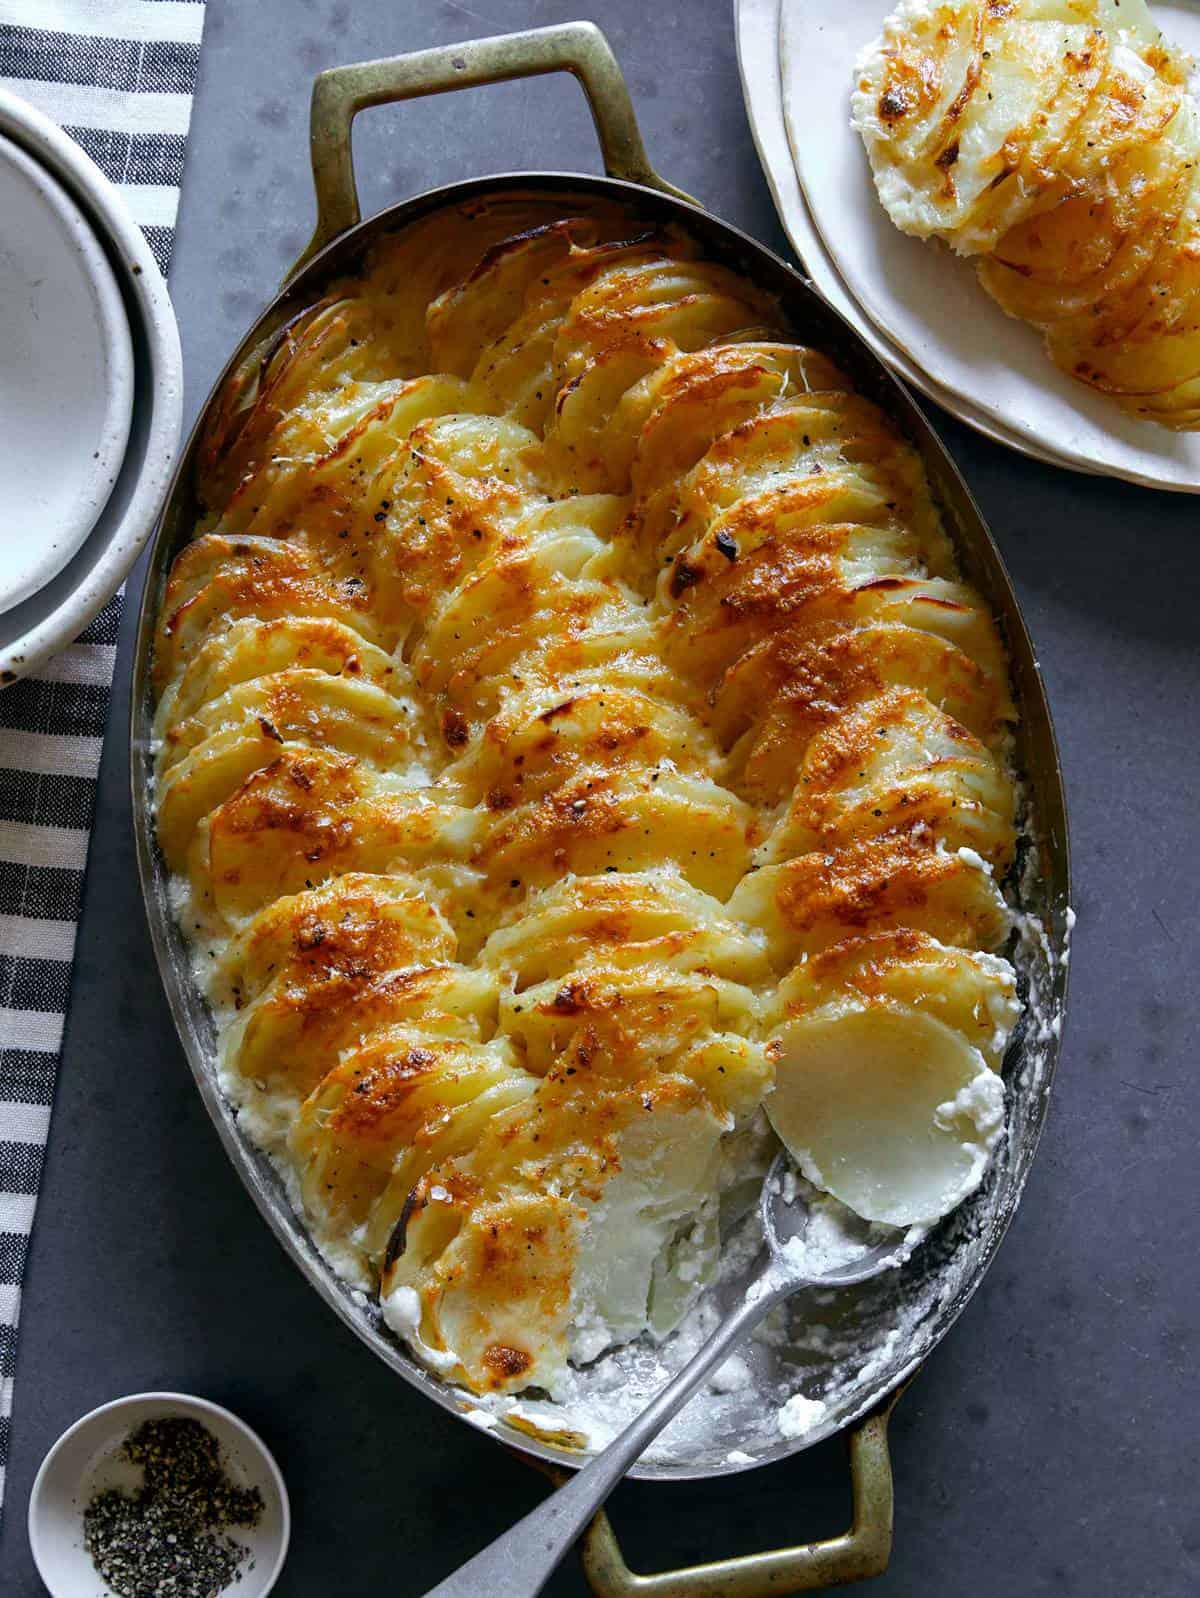 Cheesy garlic potato gratin in an oval baking dish with a scoop taken out with a spoon.